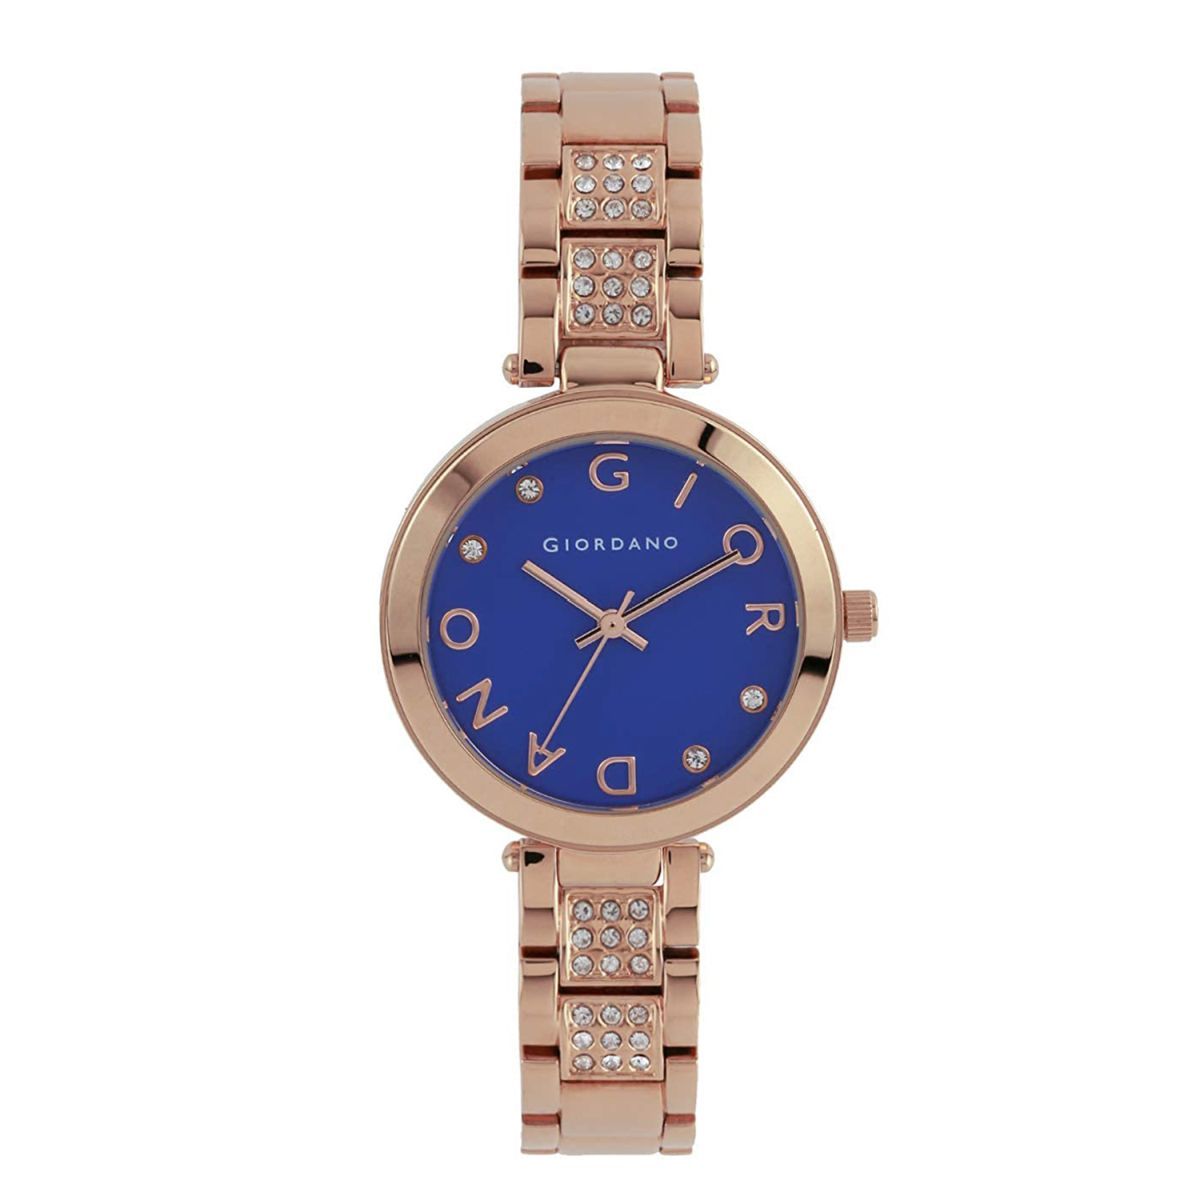 High End Designer Cassidy Tank Giordano Watches For Women Fashionable Trend  Movement, Light Luxury Gubi, Perfect Christmas Gift From  Toryburch_luxurybag, $186.59 | DHgate.Com